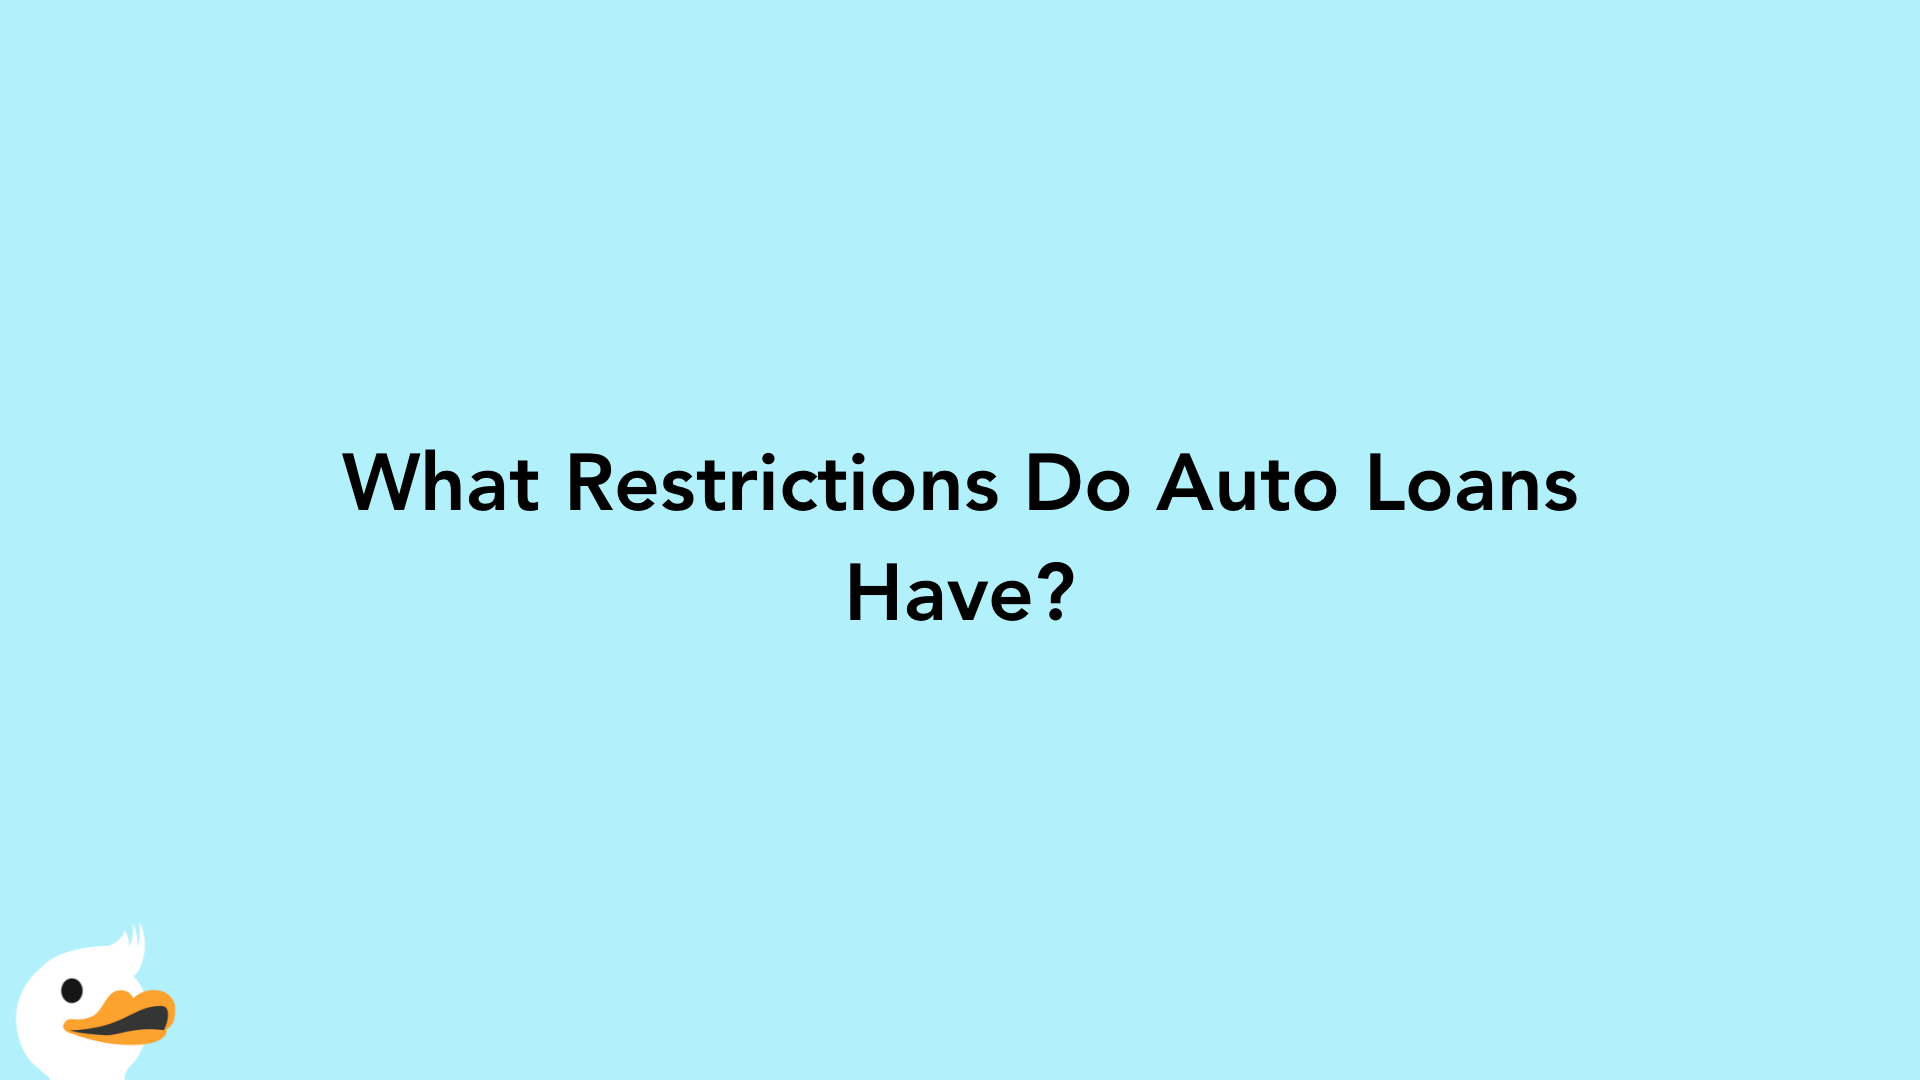 What Restrictions Do Auto Loans Have?